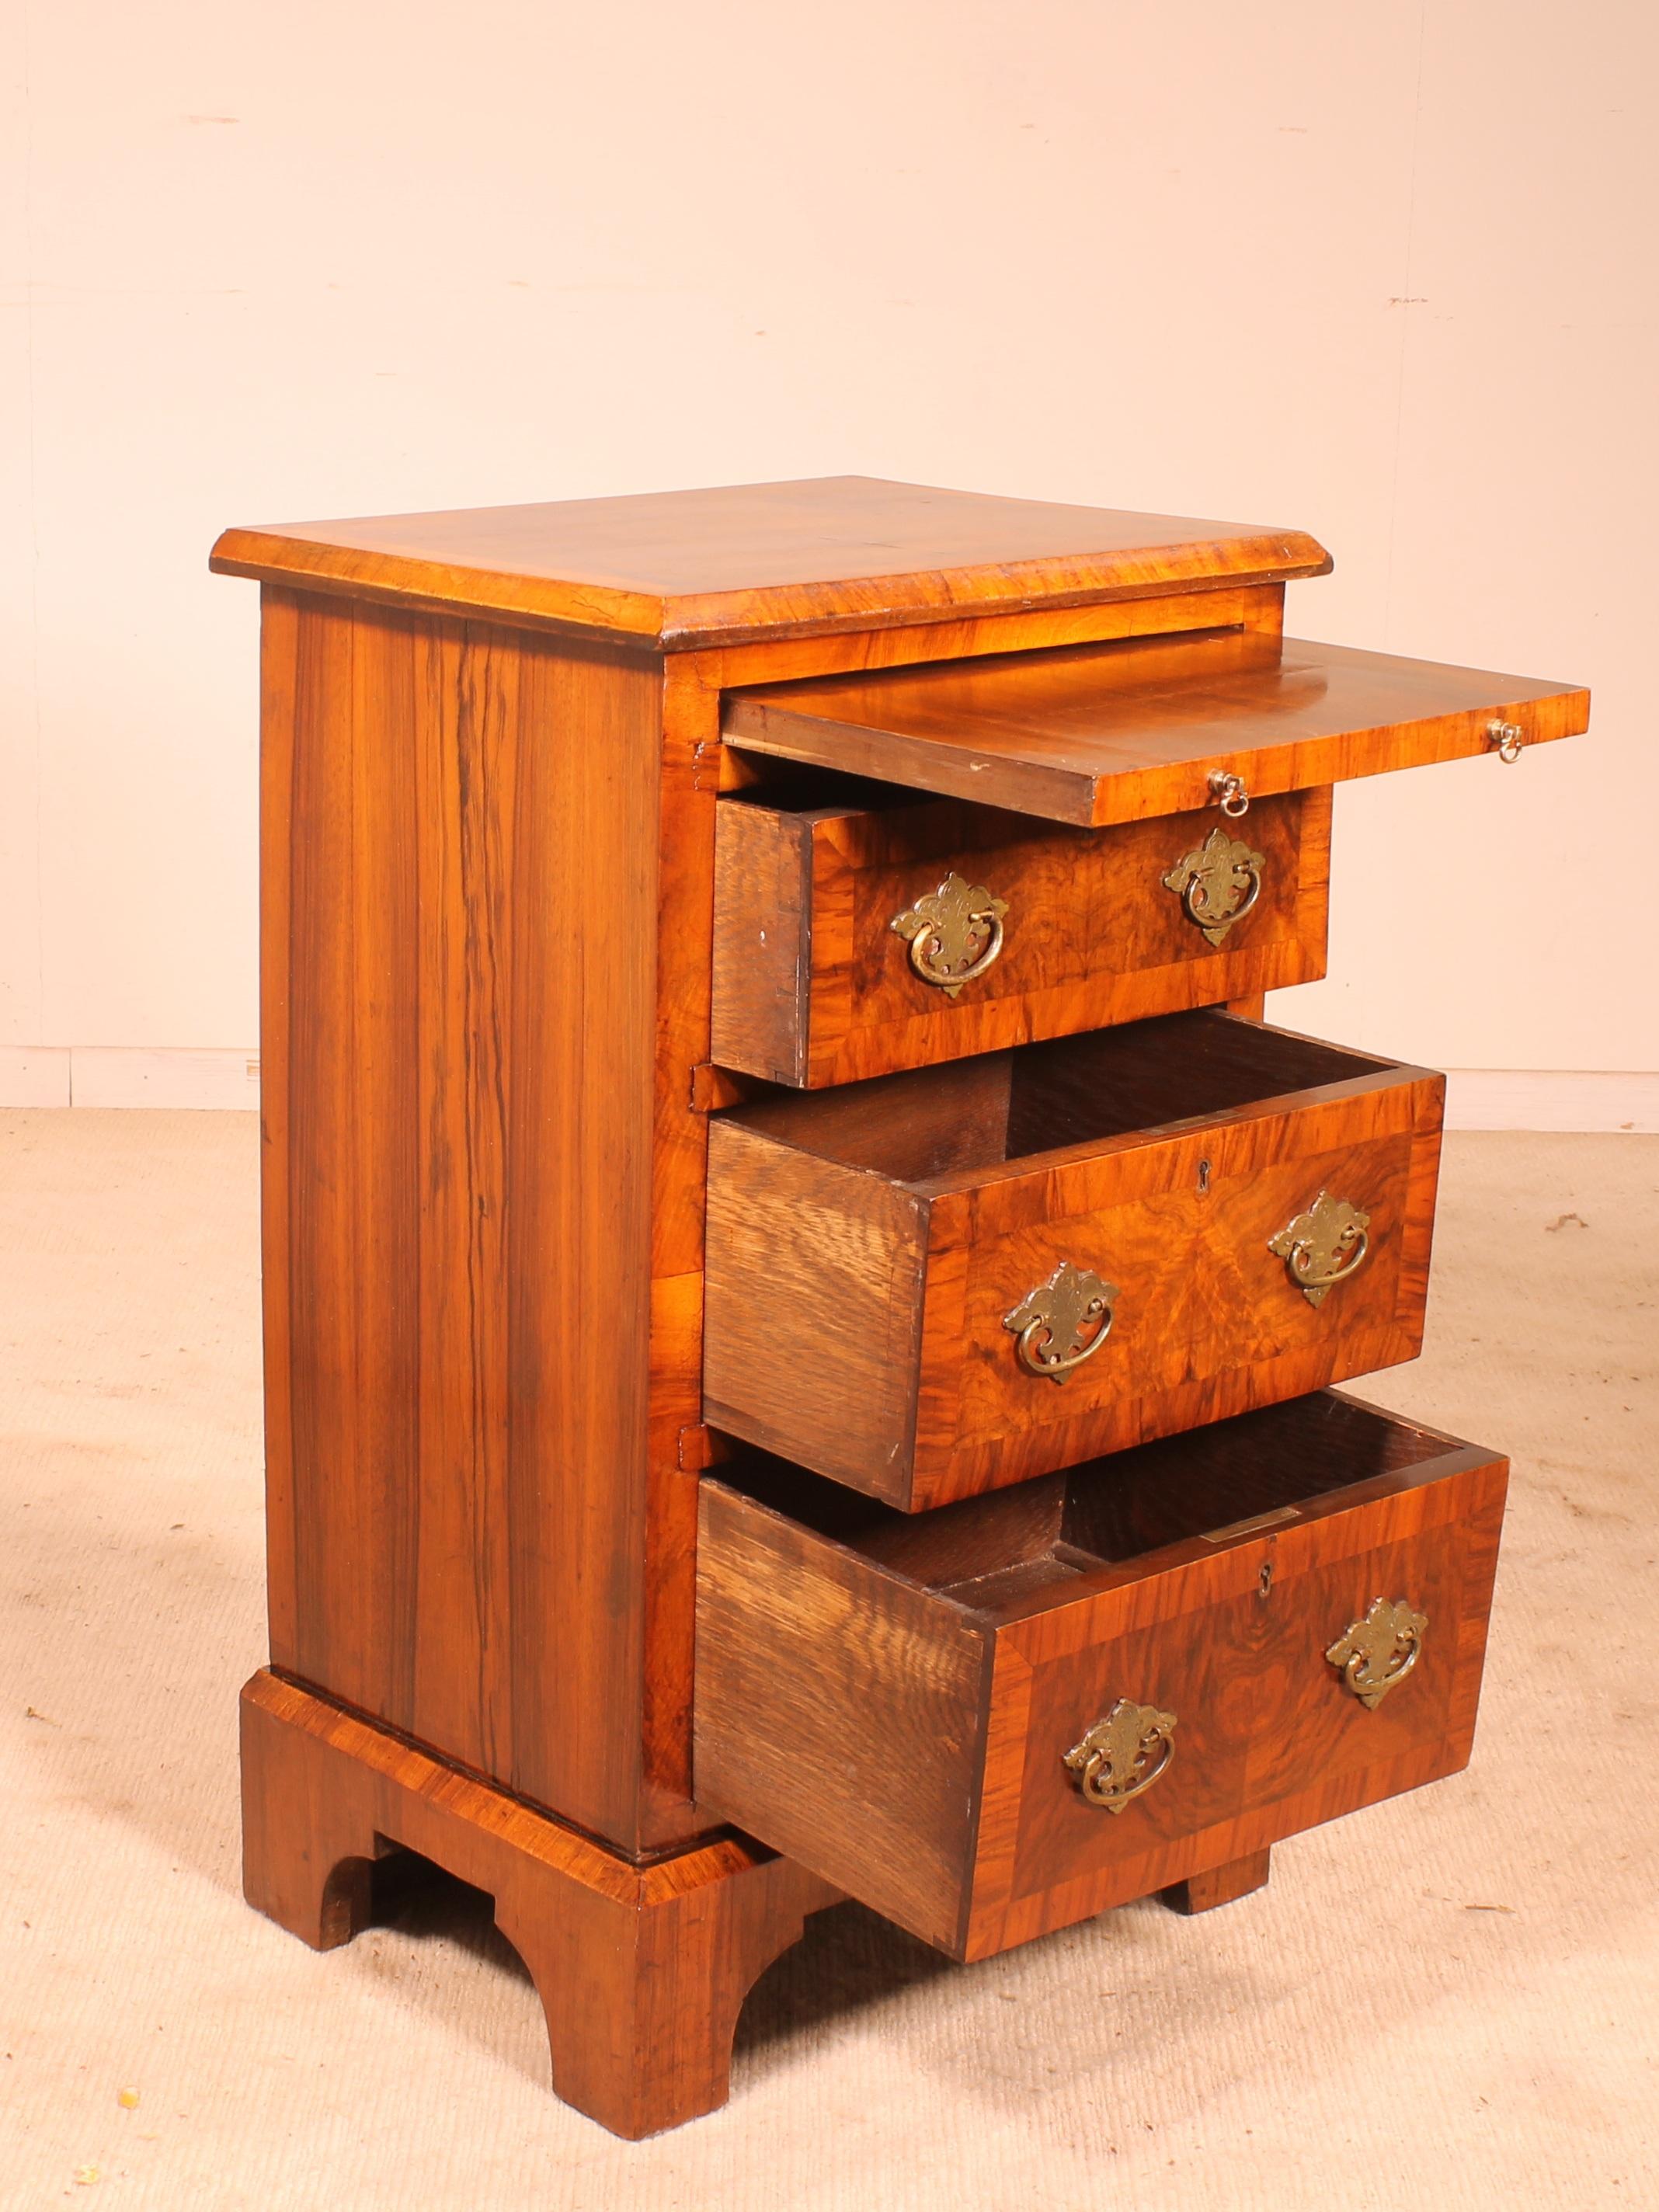 Early Victorian Bedside or Mini Chest from the 19th Century in Blurr Walnut